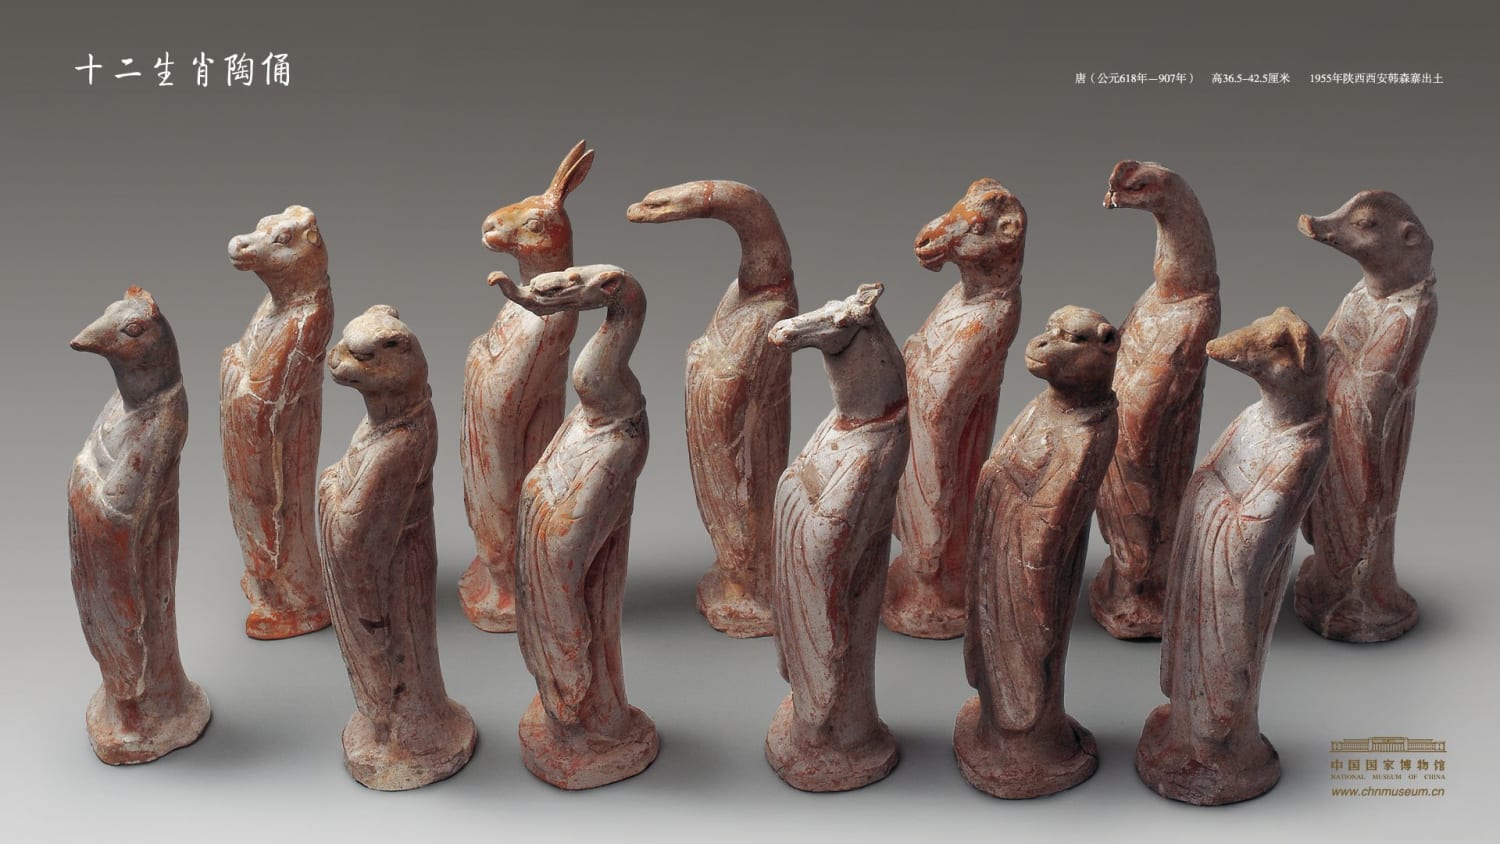 Chinese zodiac pottery statues from the National Museum of China's collection dating back to the Tang Dynasty (AD 618-907)